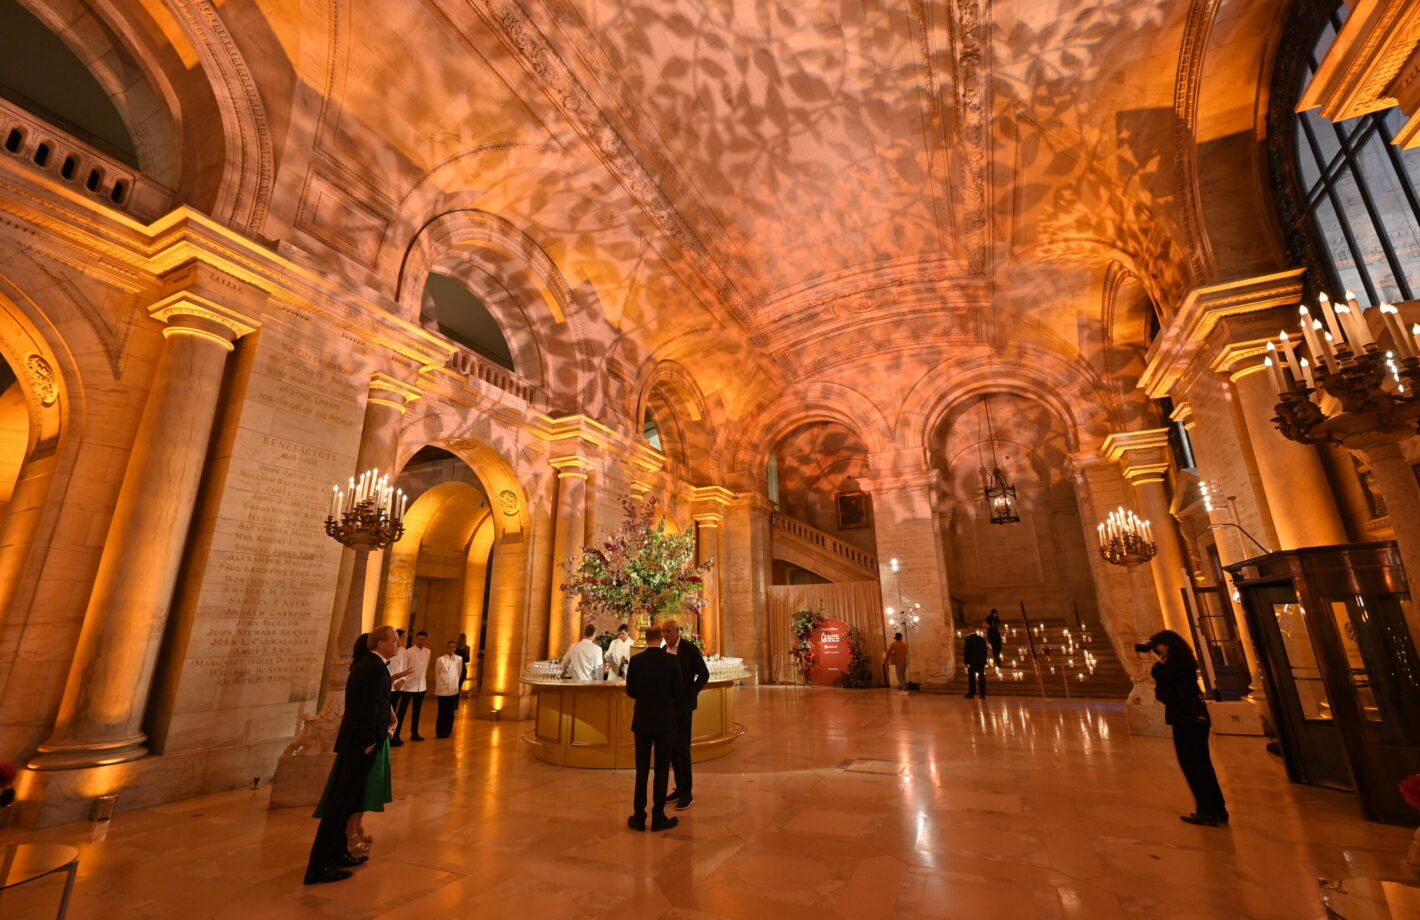 The New York Public Library on the day of the inaugural Albies ceremony